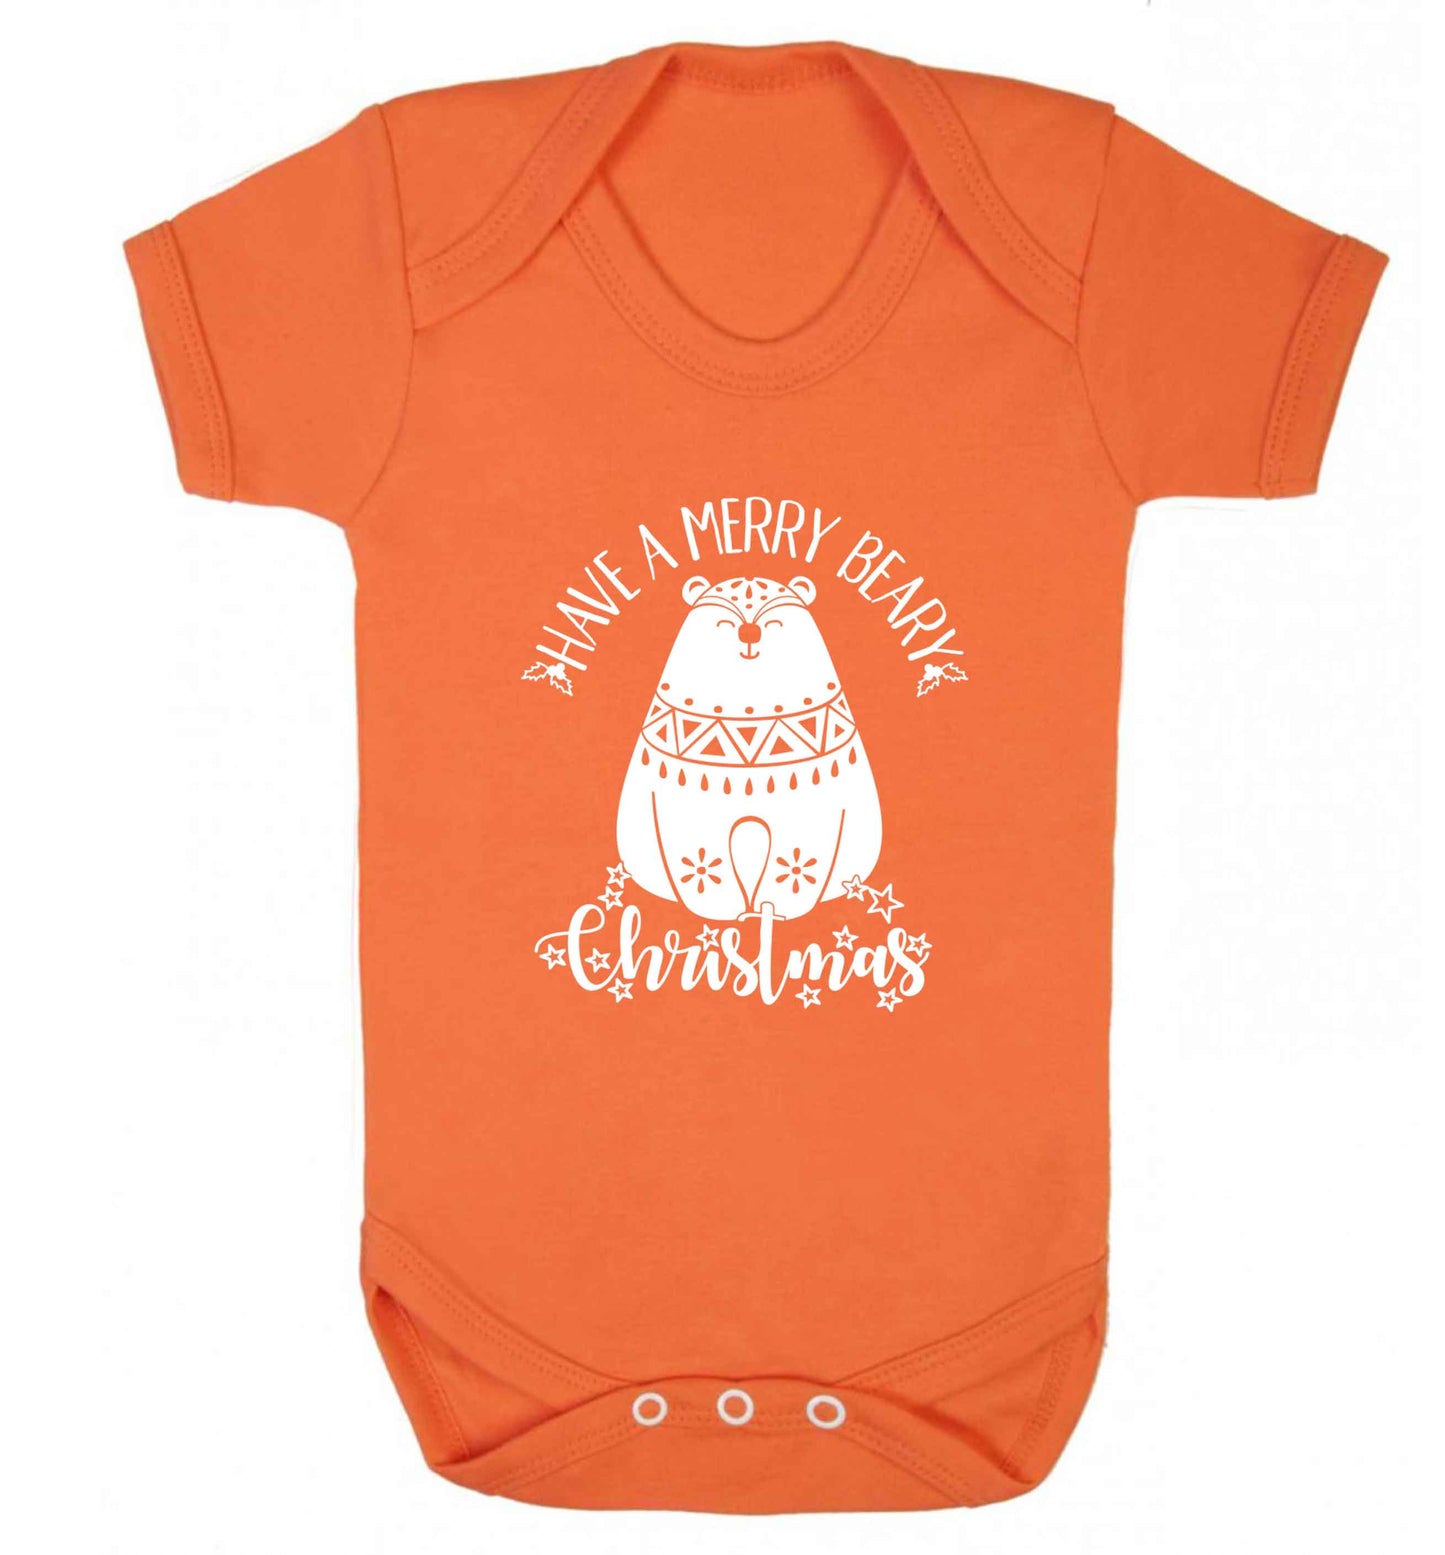 Have a merry beary Christmas Baby Vest orange 18-24 months